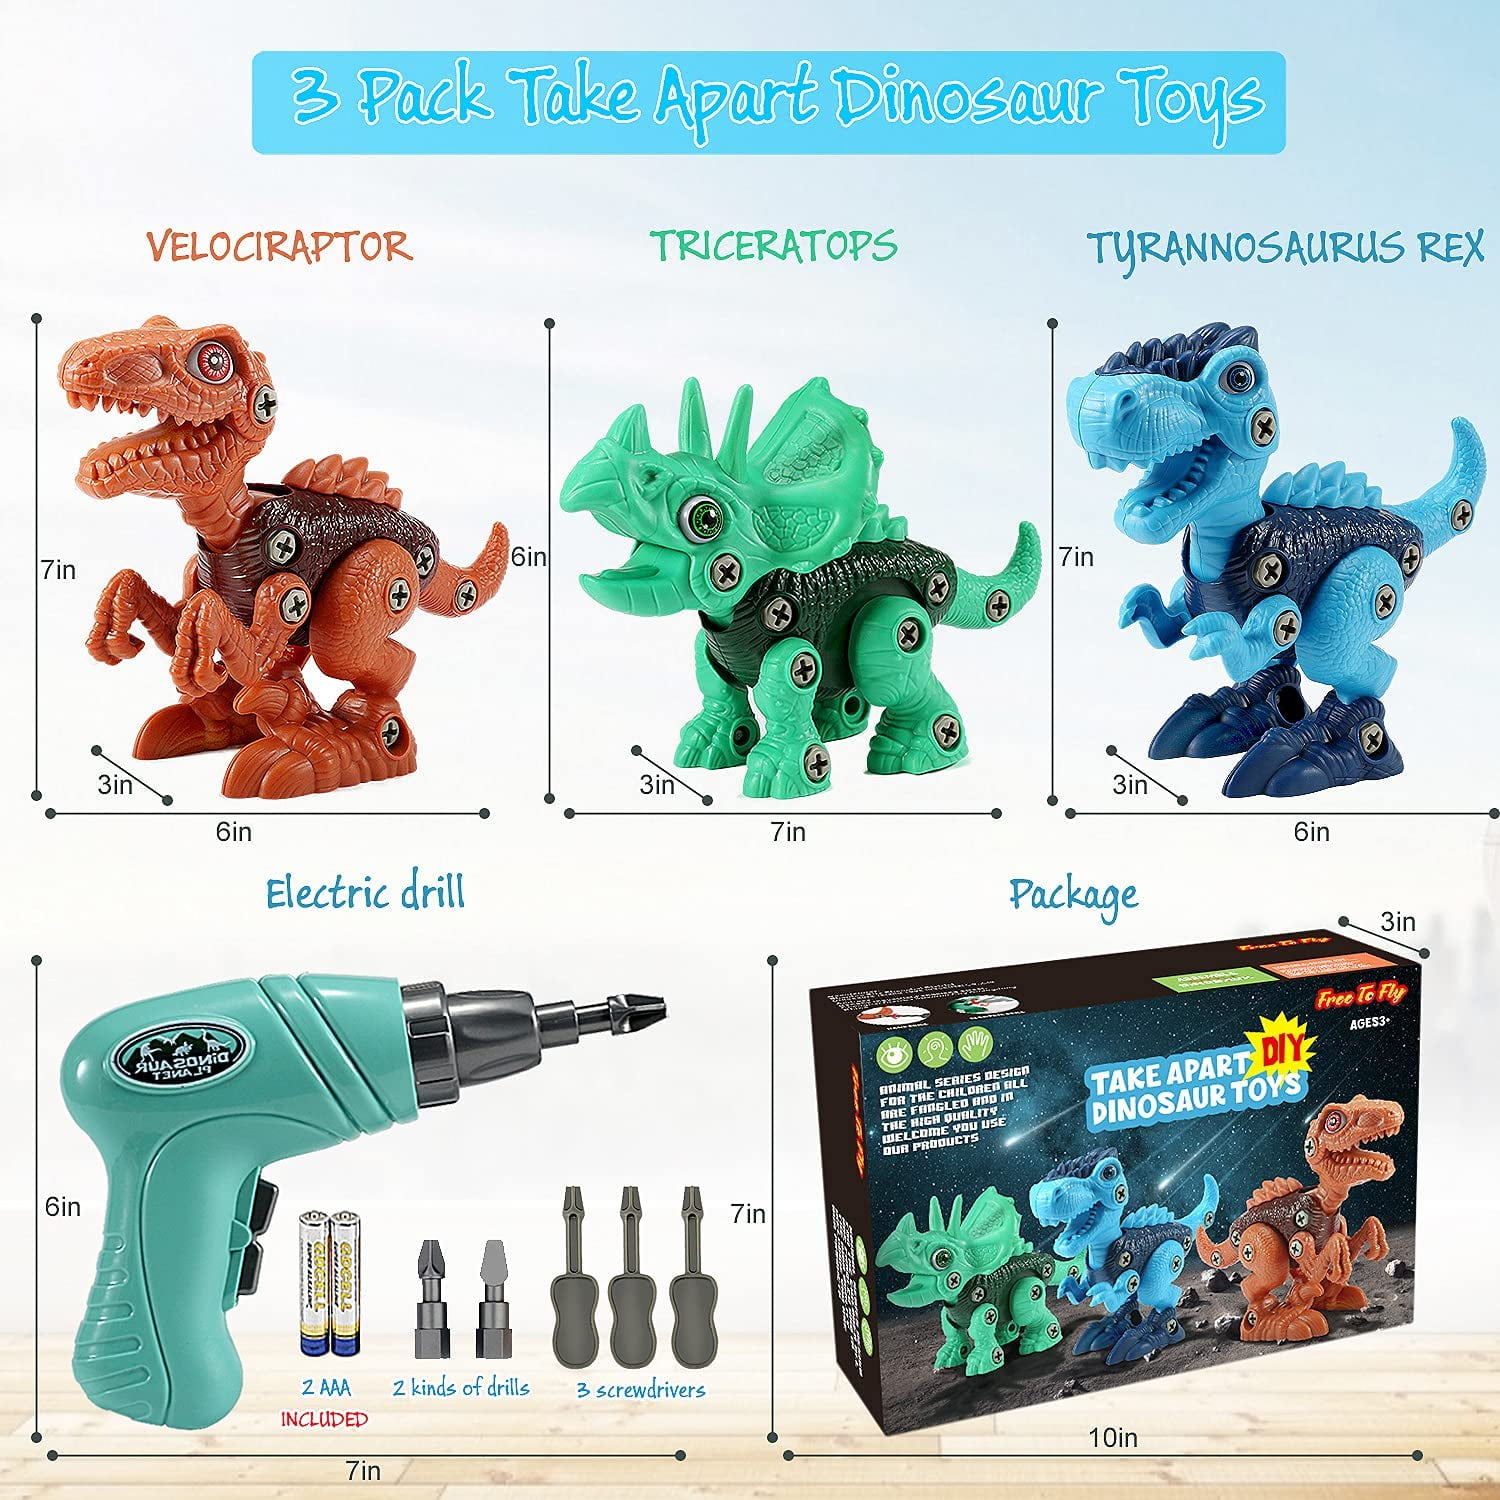 Great as Gifts for Christmas Birthday Gifts Party Favor. DIY Stem Construction Building Play Kits Transform Toy for Toddler Boys Girls Take Apart Fun Dinosaur Toys for Kid 3 4 5 6 7 Years Old 